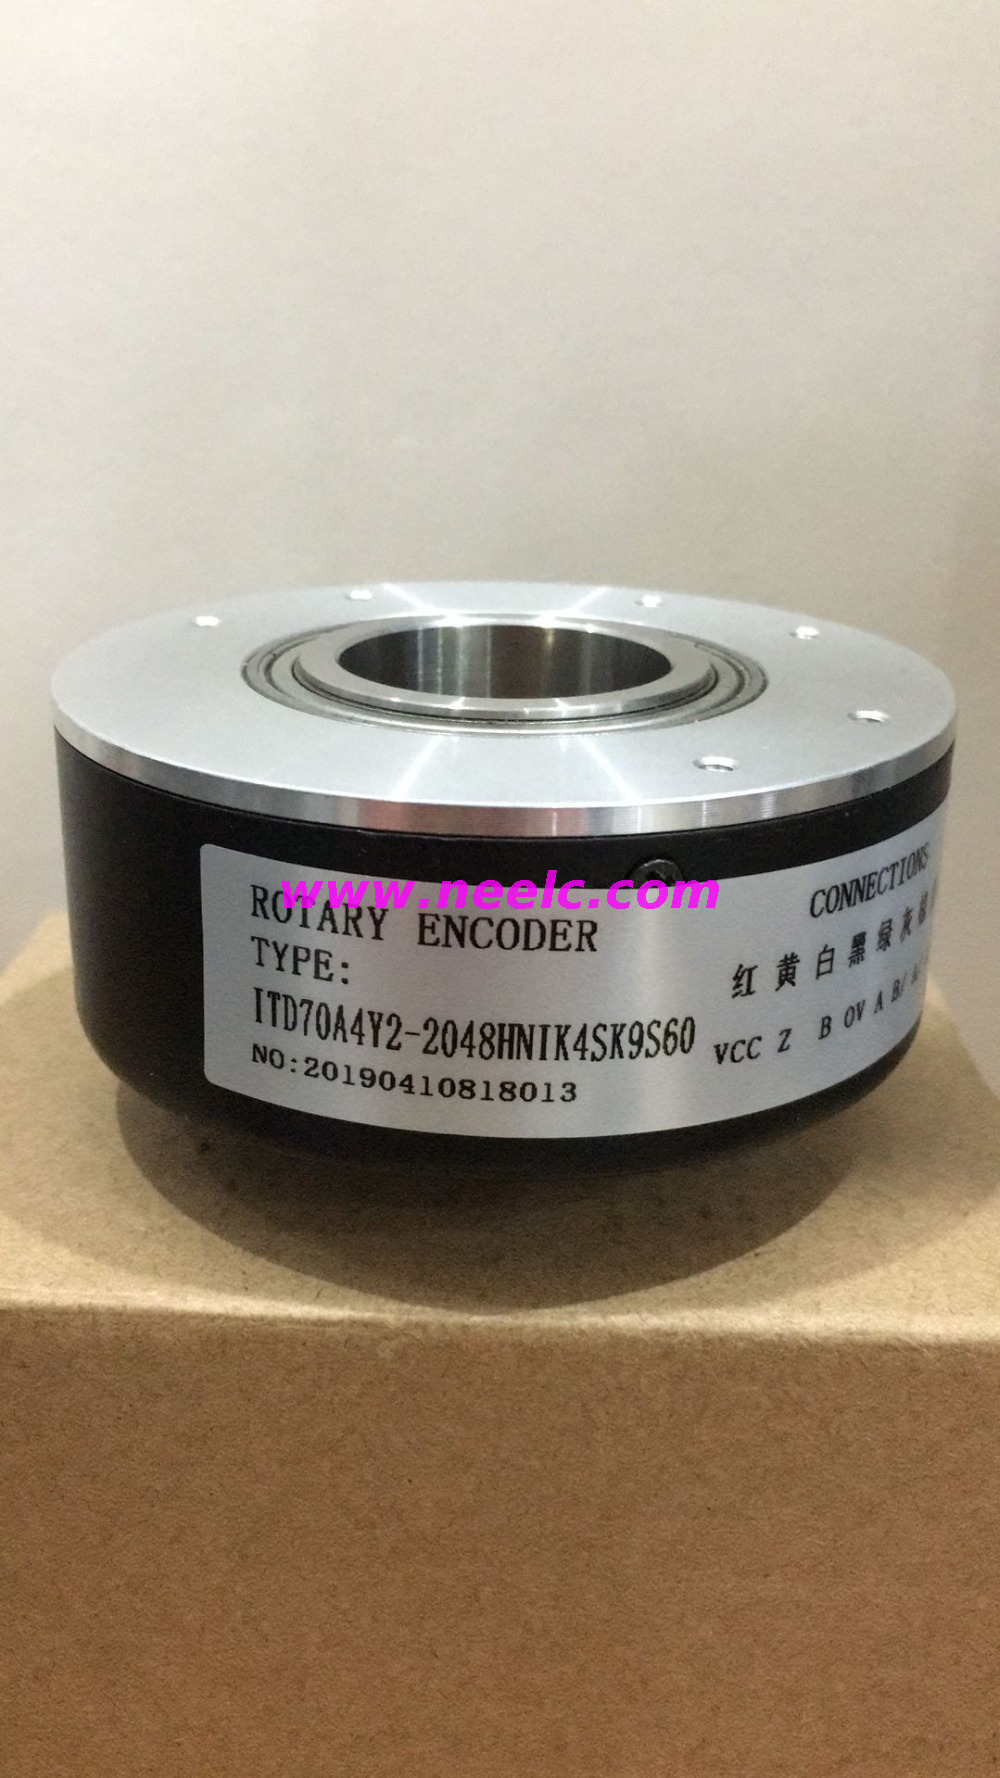 ITD70A4Y2-2048HNIK4SK9S60 new and 100% compatible encoder, the hole diamention is 60mm